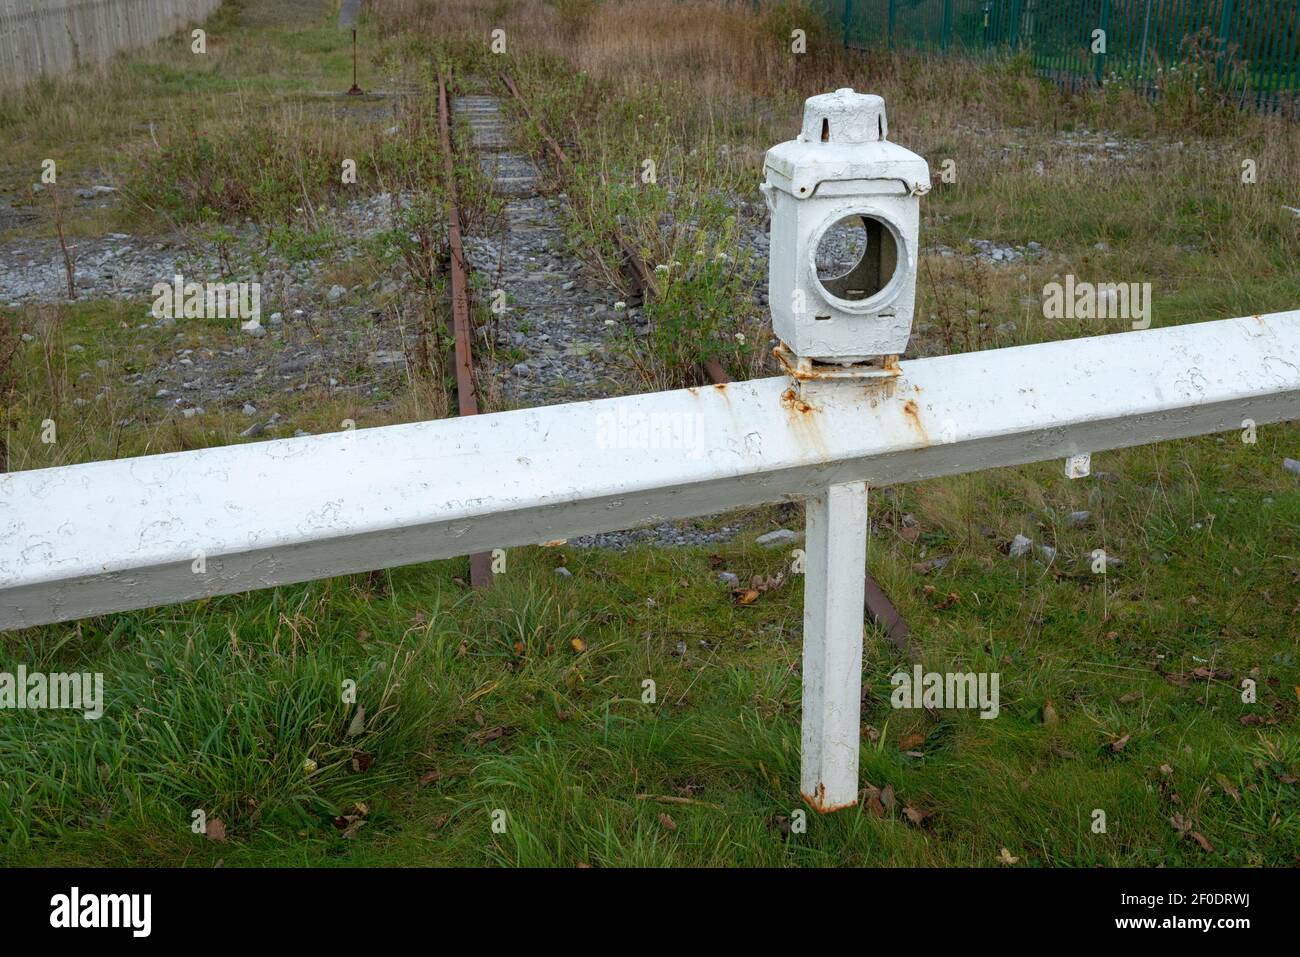 Antique vintage signal lamp on a barrier at derelict railway. Stock Photo